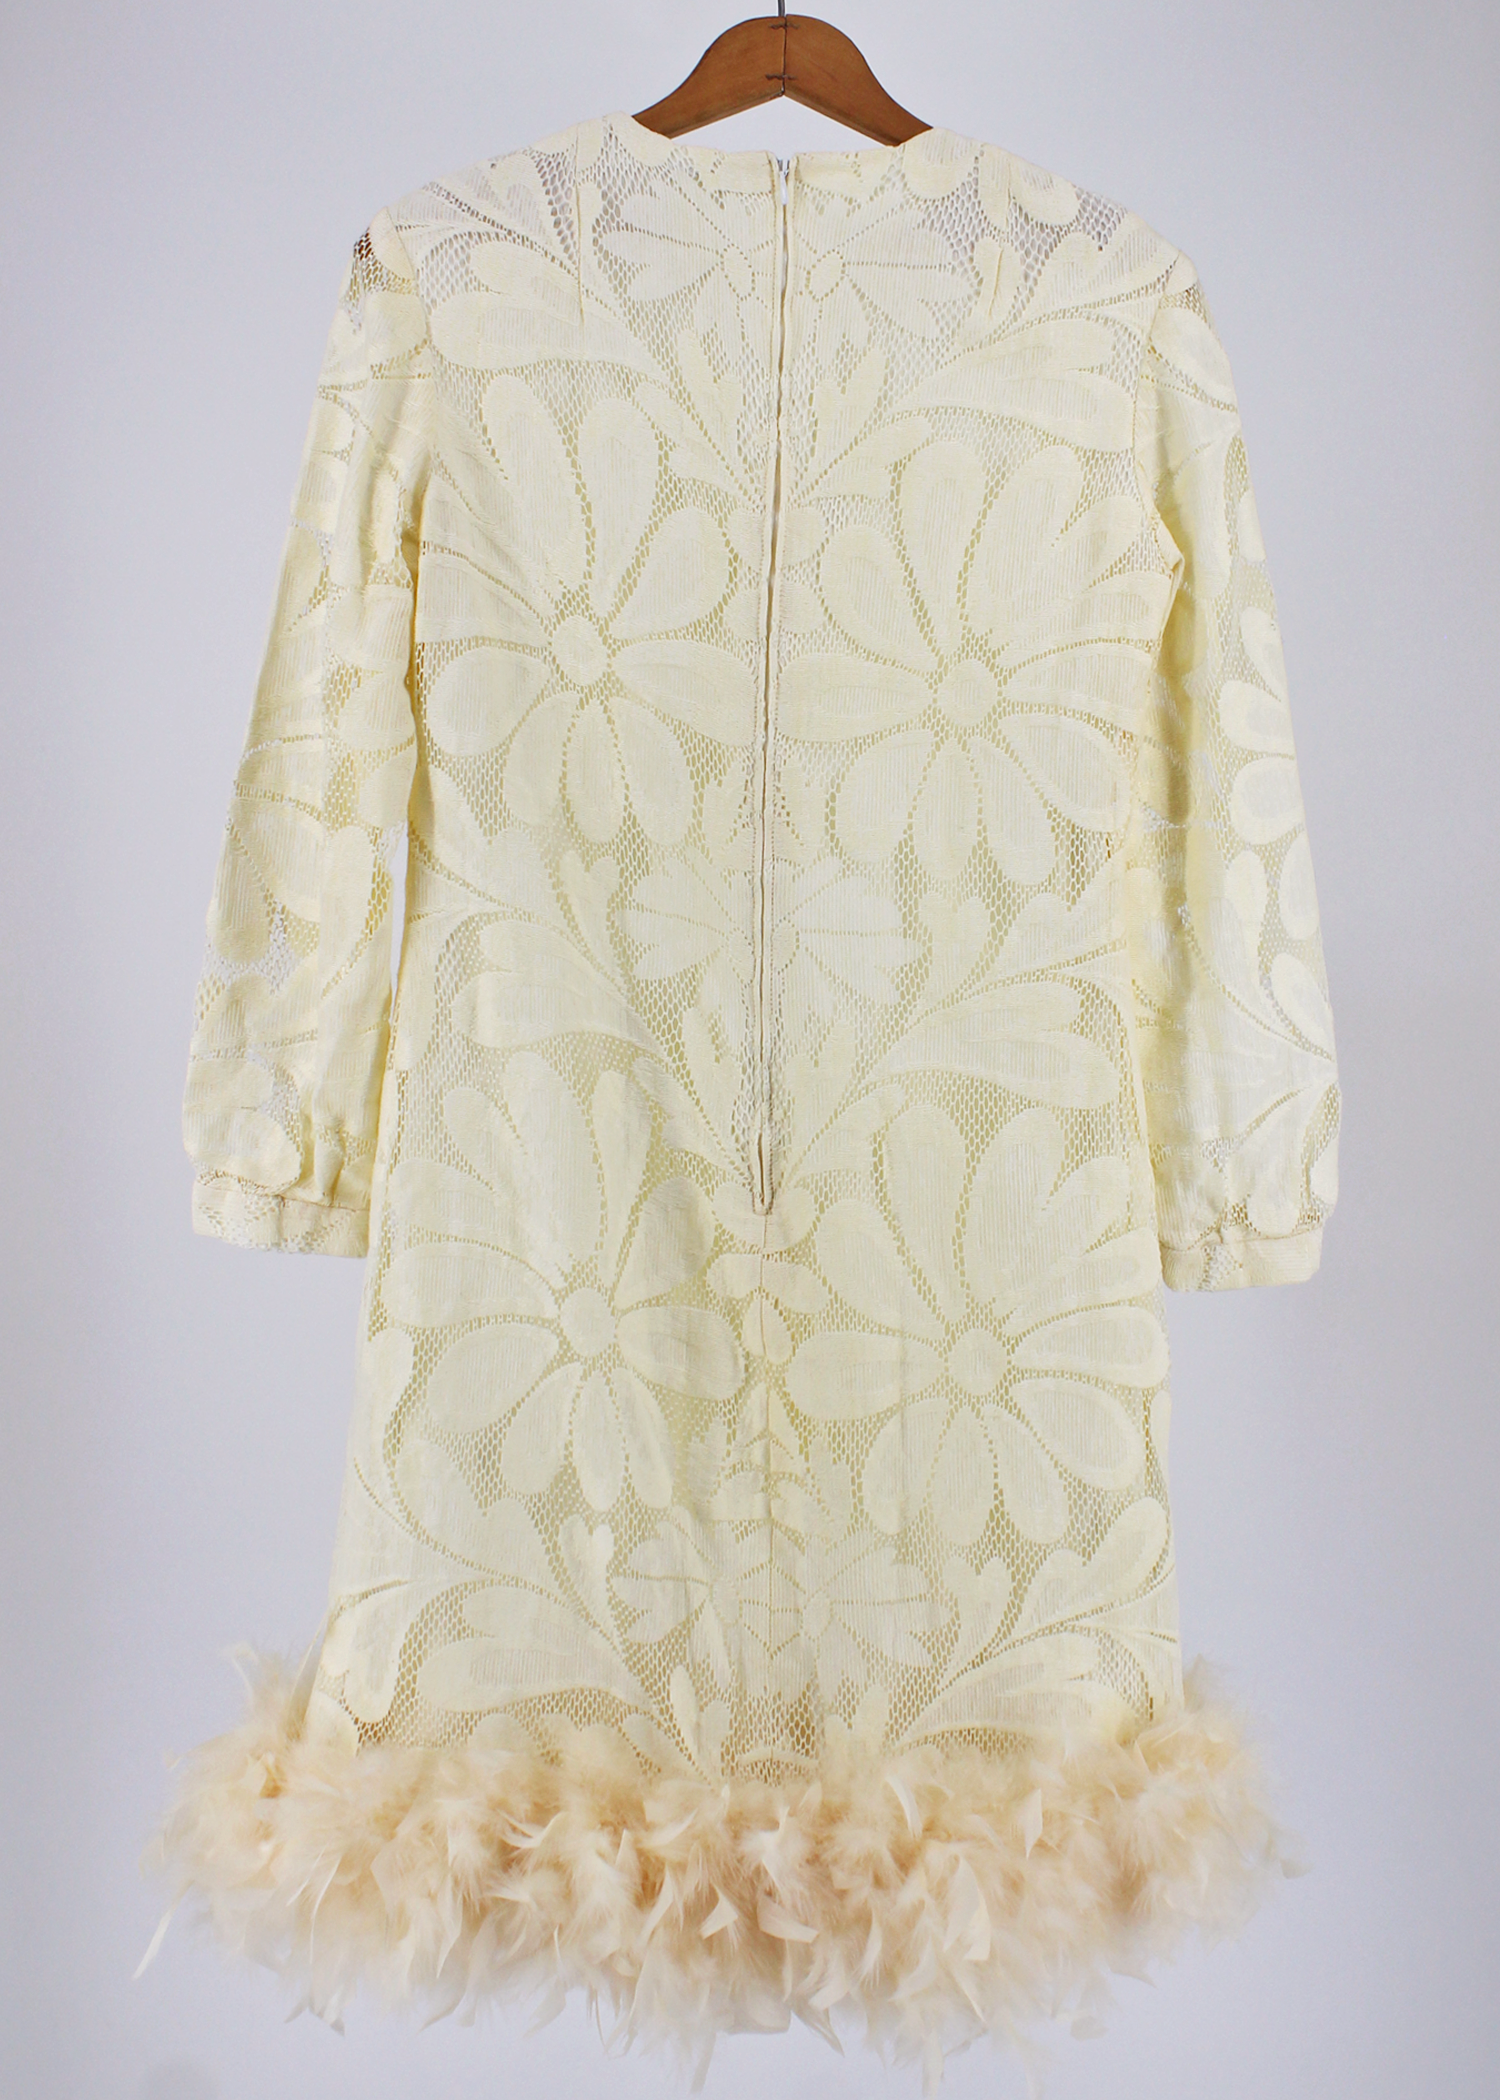 Beautiful 1970s ivory lace dress featuring an oversized daisy lace pattern, cuffed long sleeves, and a gorgeous sweep of ivory feathers at the bottom hem.